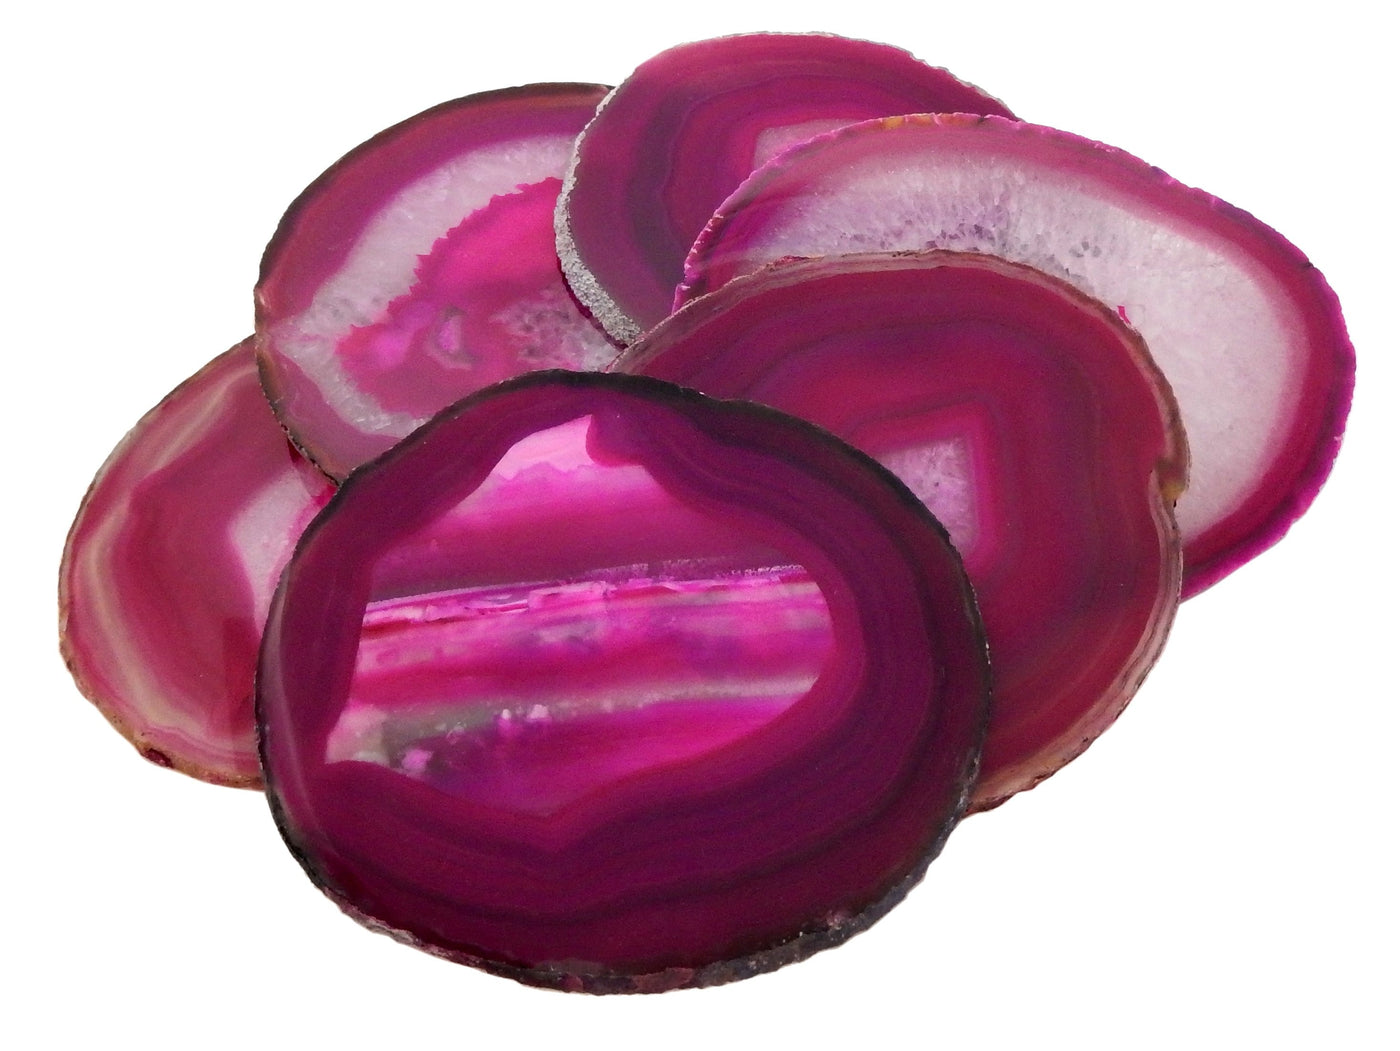 Agate Slices - Pink Agate Slice - 6 in a pile